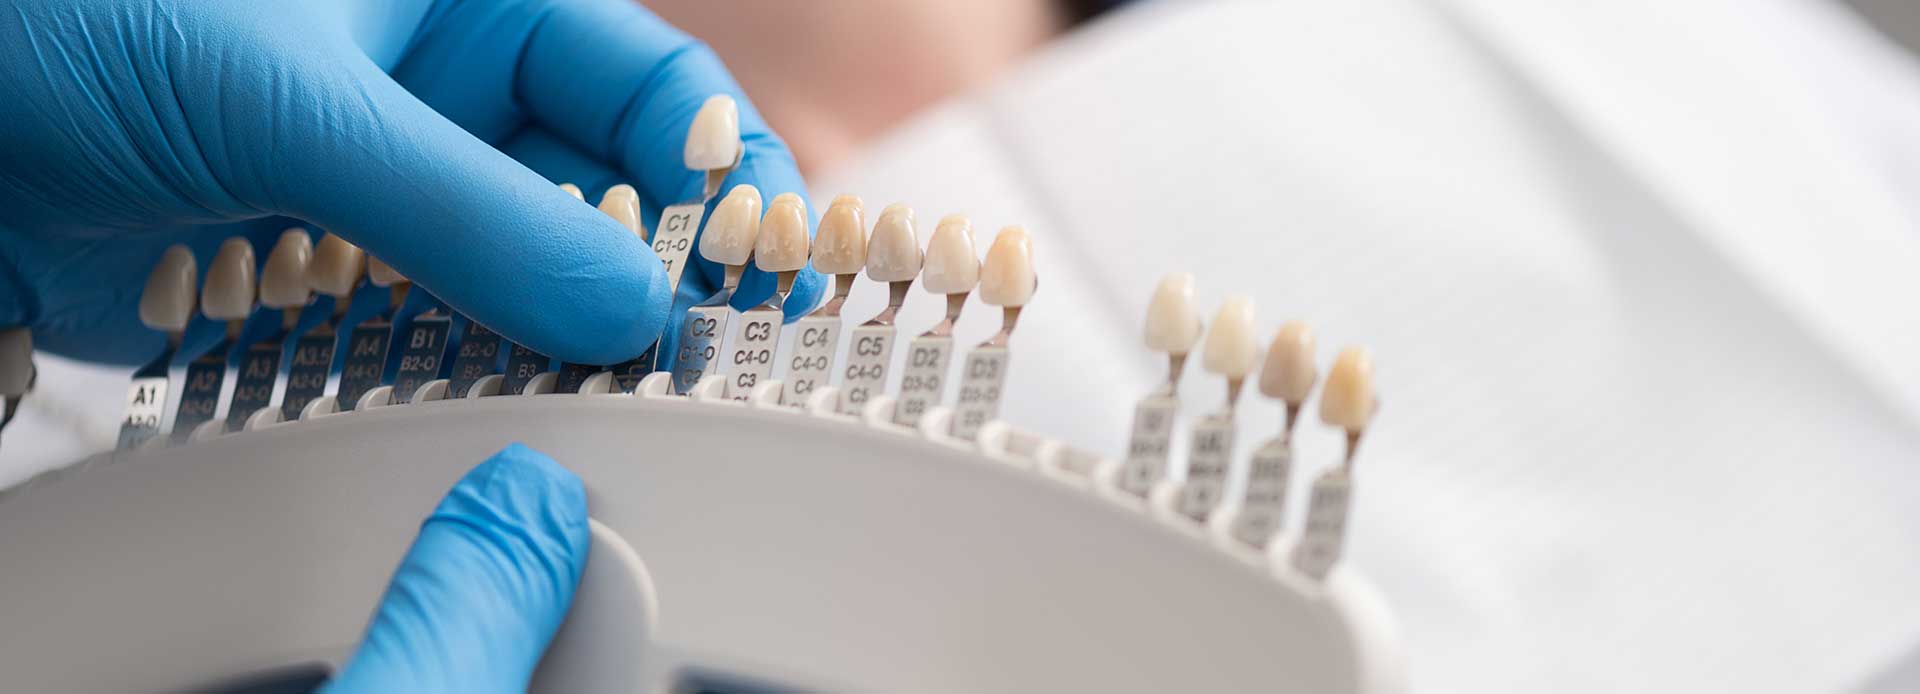 A dental staff picking a dental crown amongst different sizes